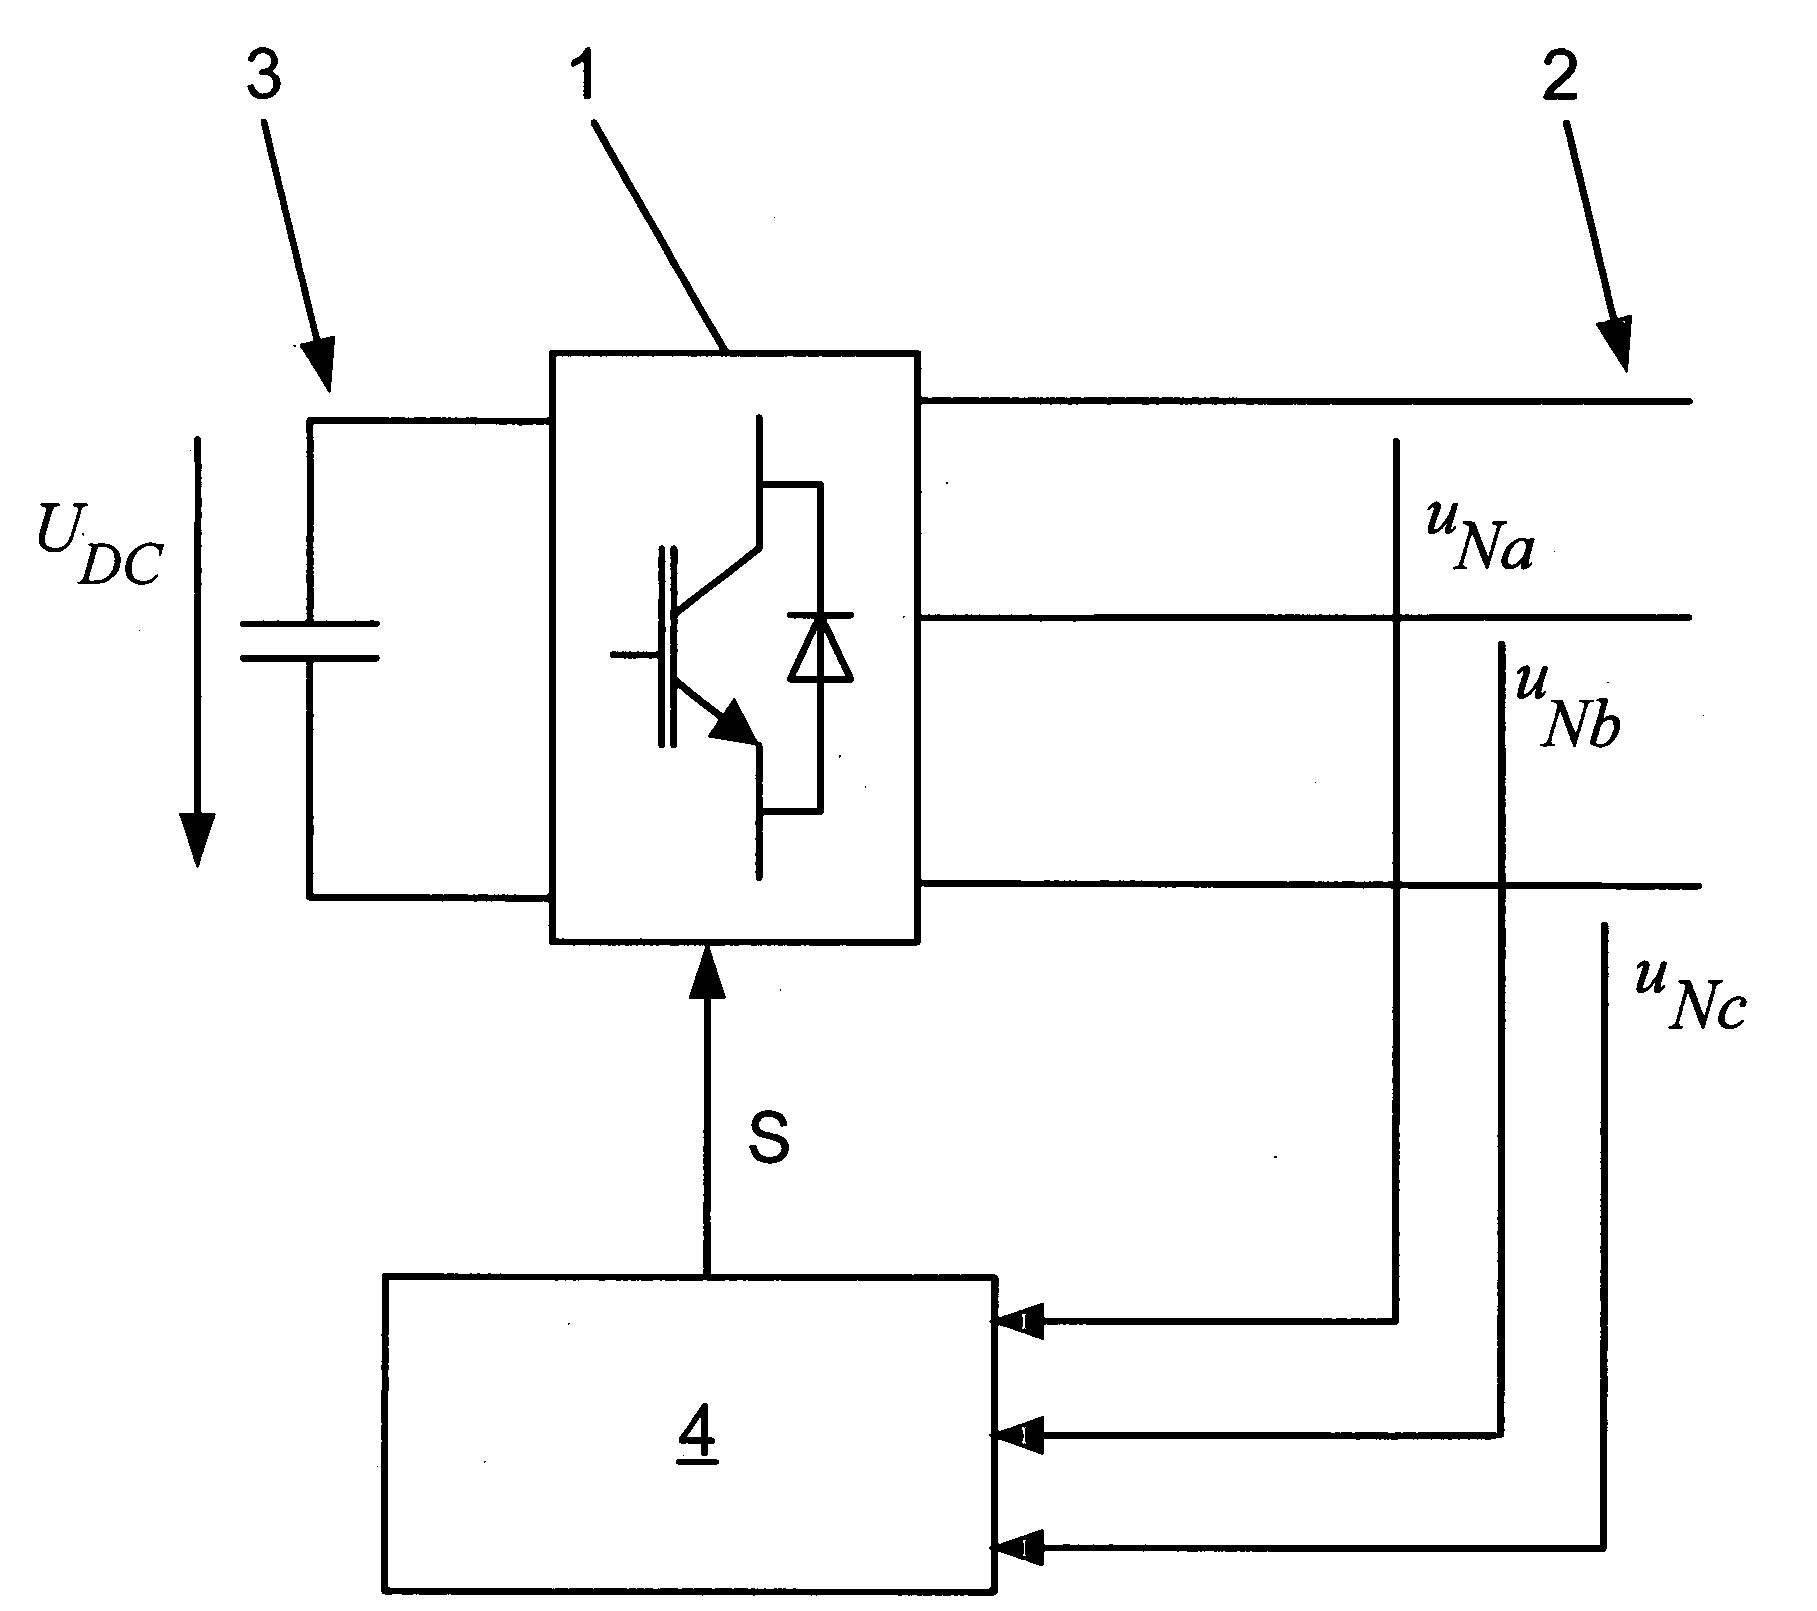 Method of operating a converter circuit